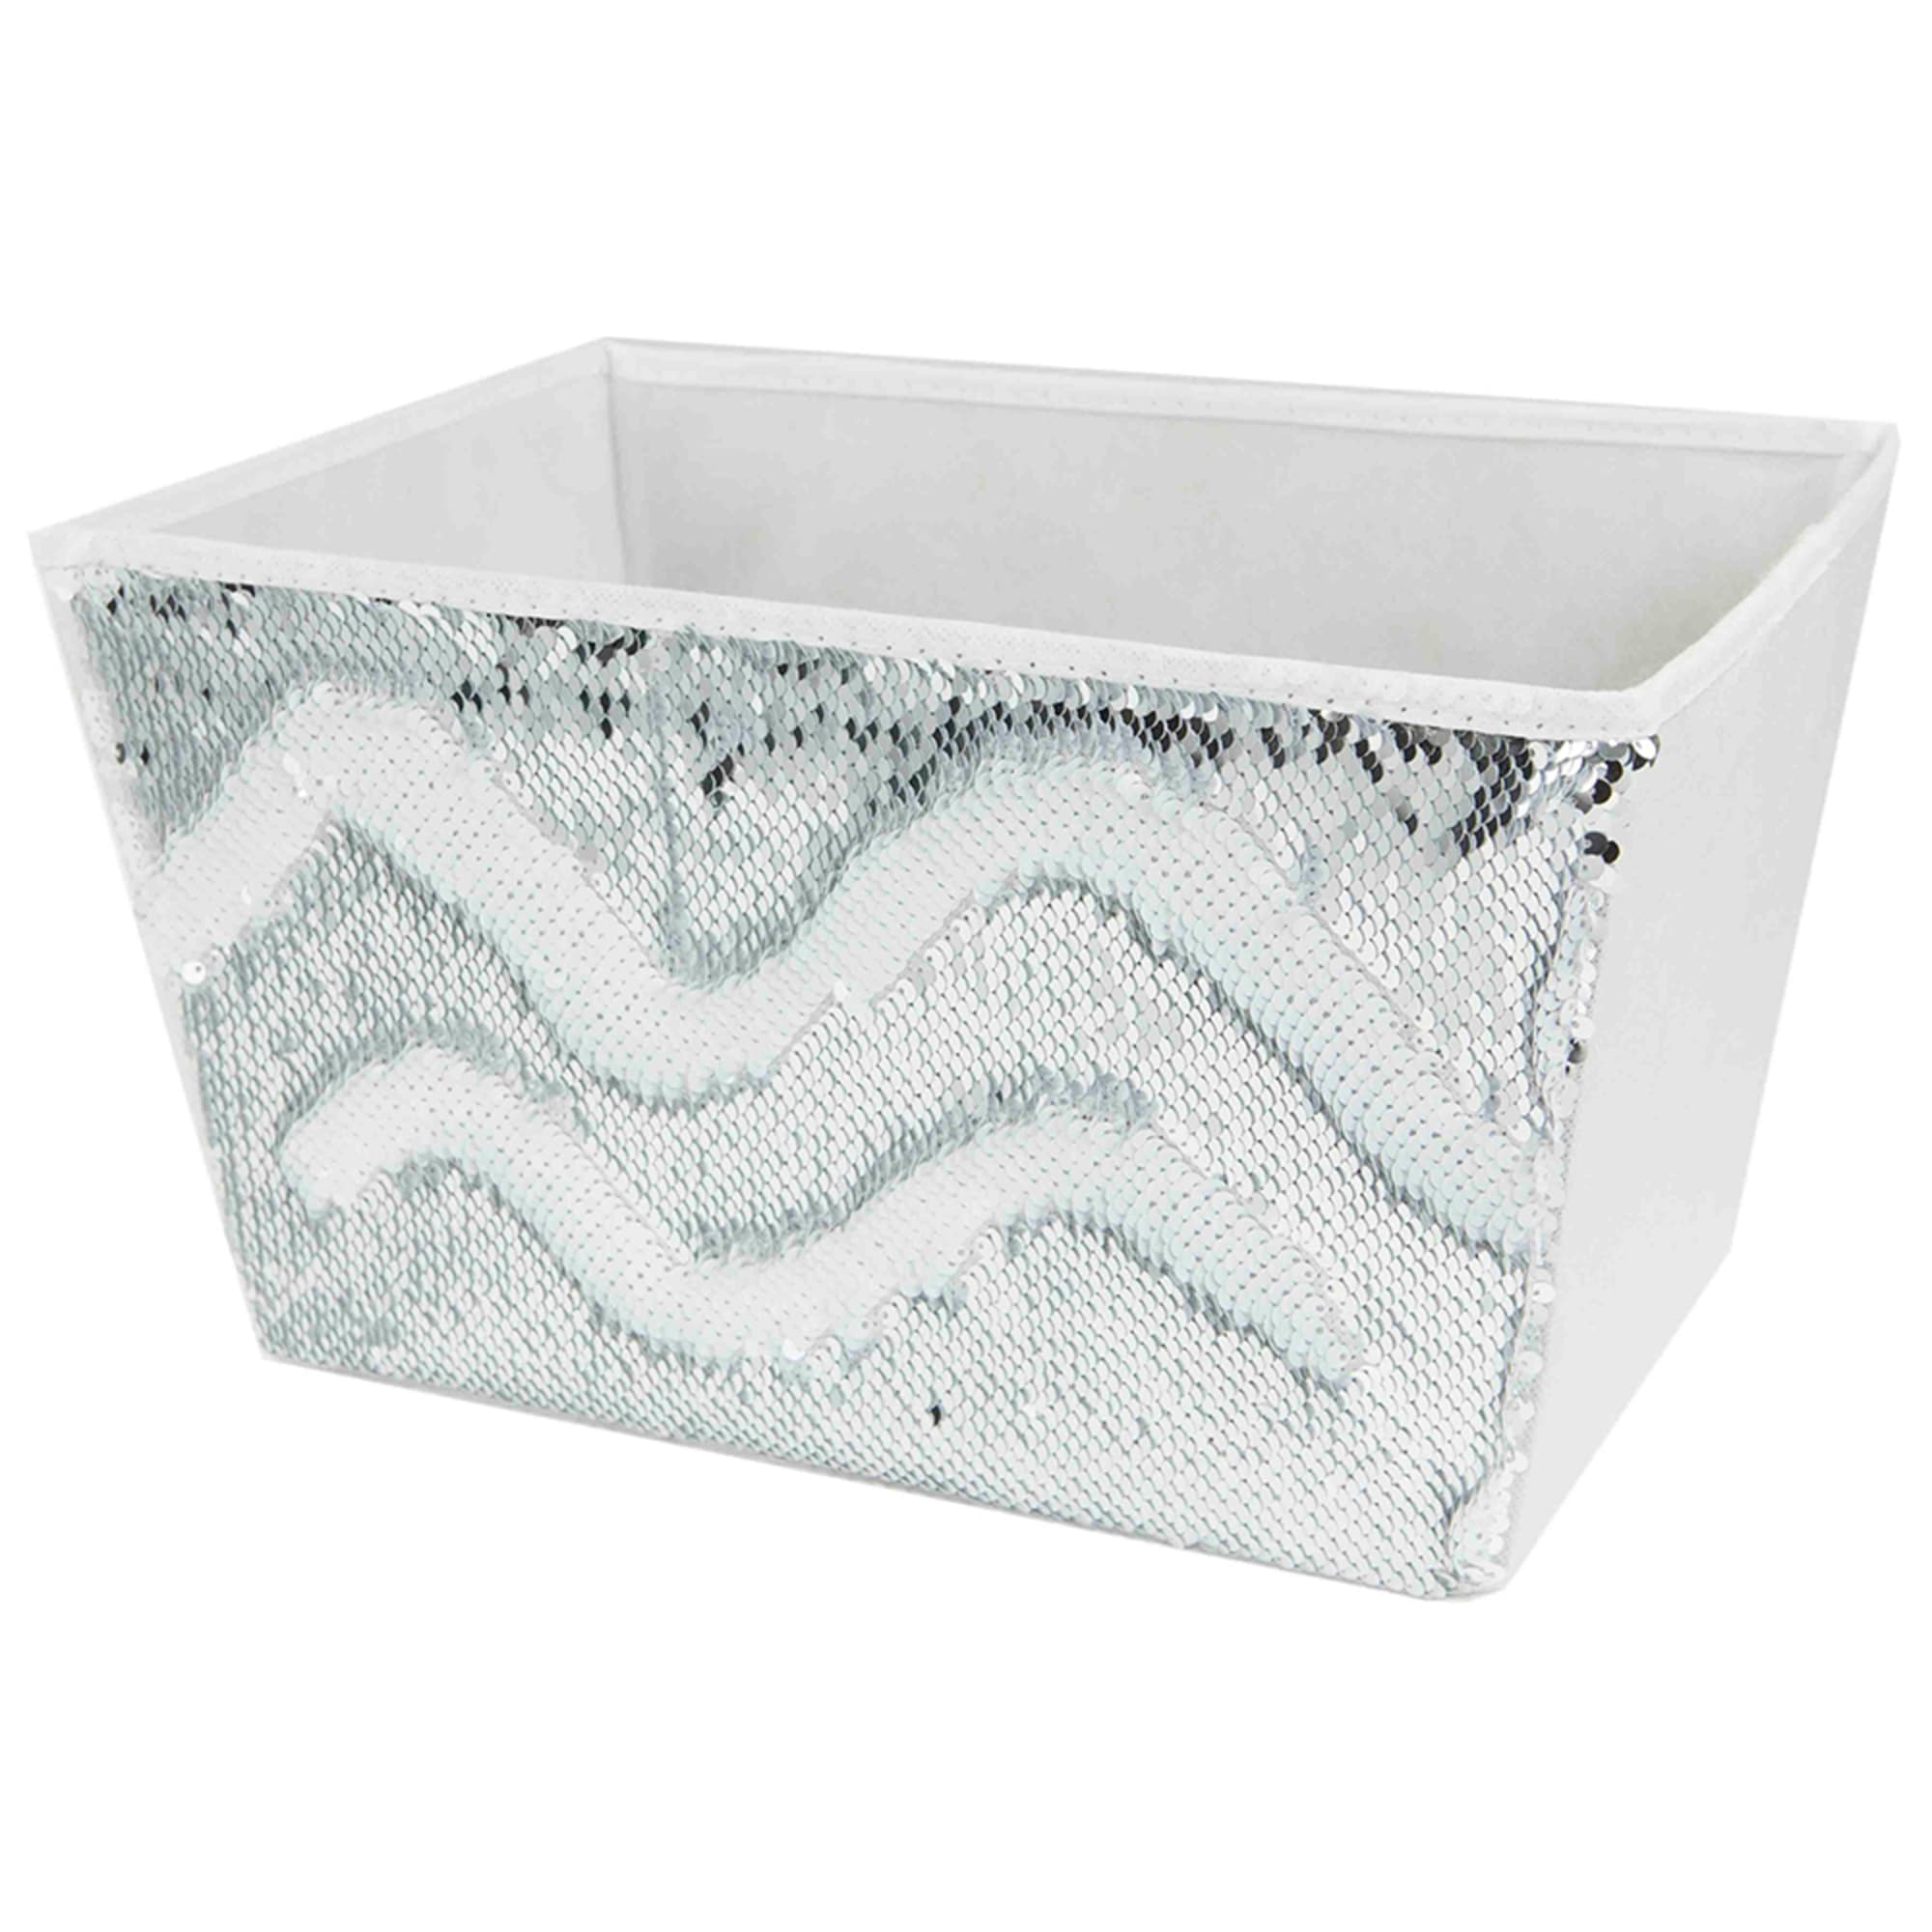 Home Basics Large Sequin Storage Bin, White/Silver $5.00 EACH, CASE PACK OF 12